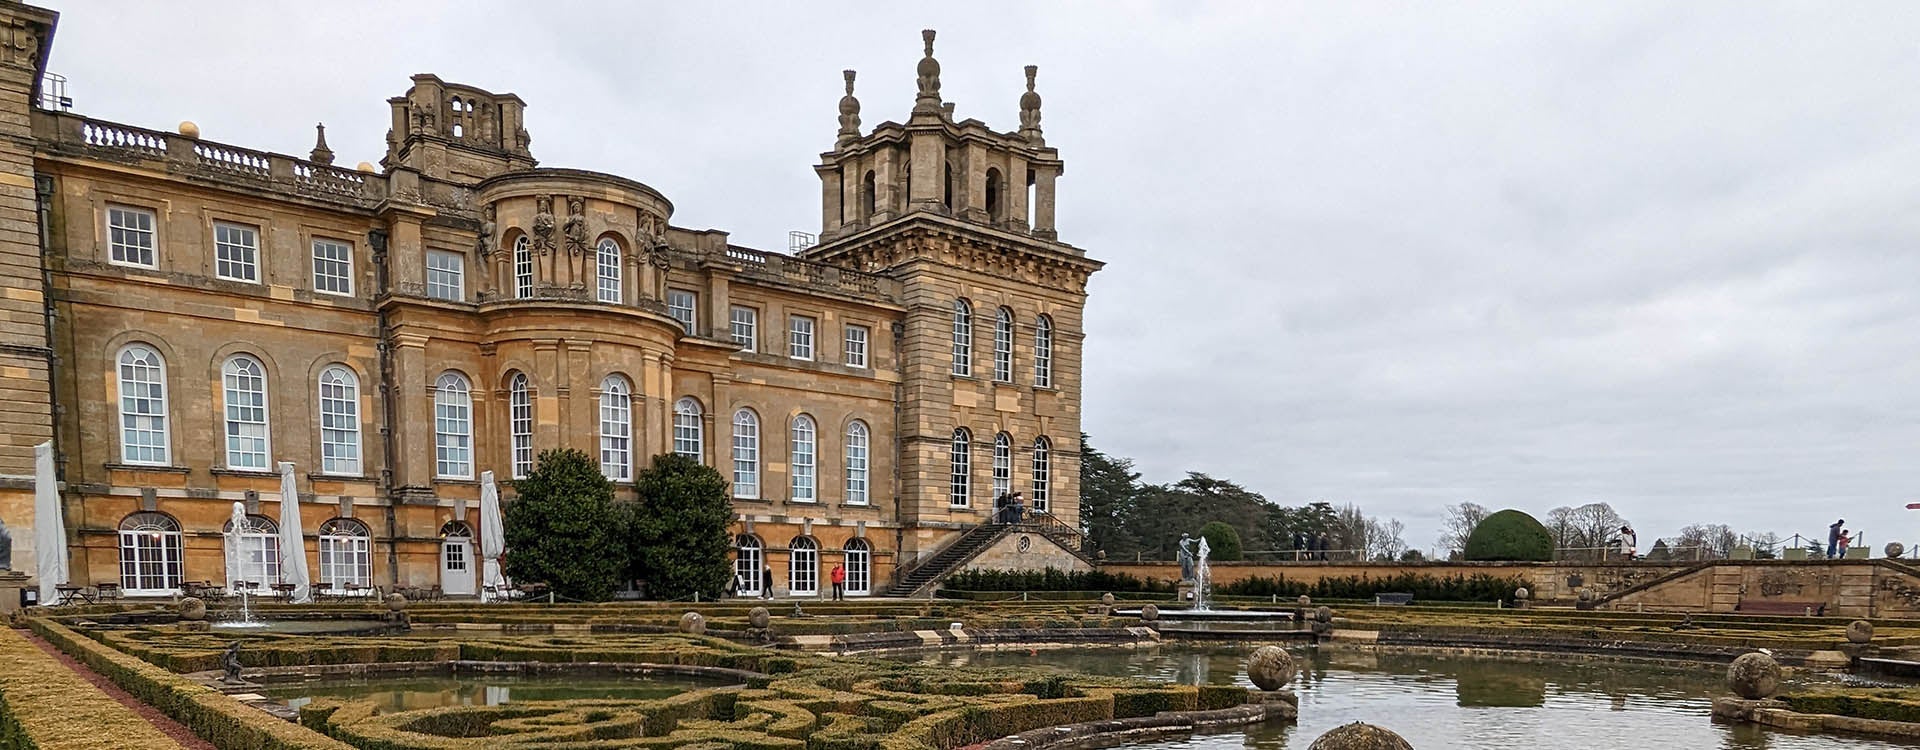 Reardon visited Blenheim Palace and its gardens in Woodstock, Oxfordshire, England. The palace is the birthplace of the former prime minister of the United Kingdom, Sir Winston Churchill.